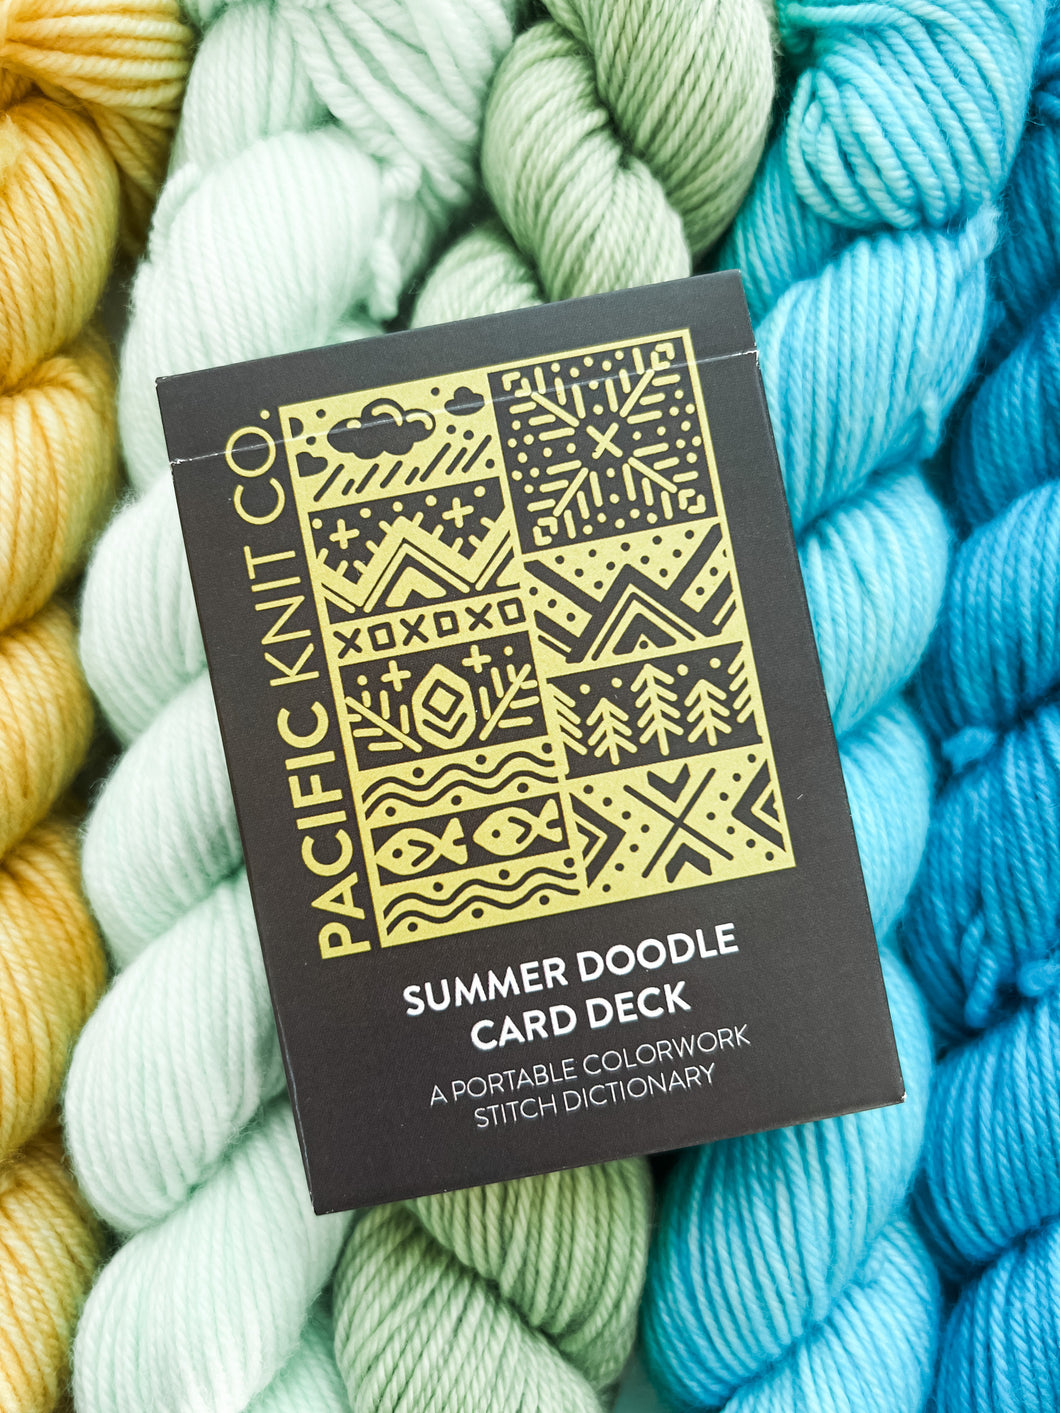 Pacific Knit Co. - Summer Doodle Card Full Deck